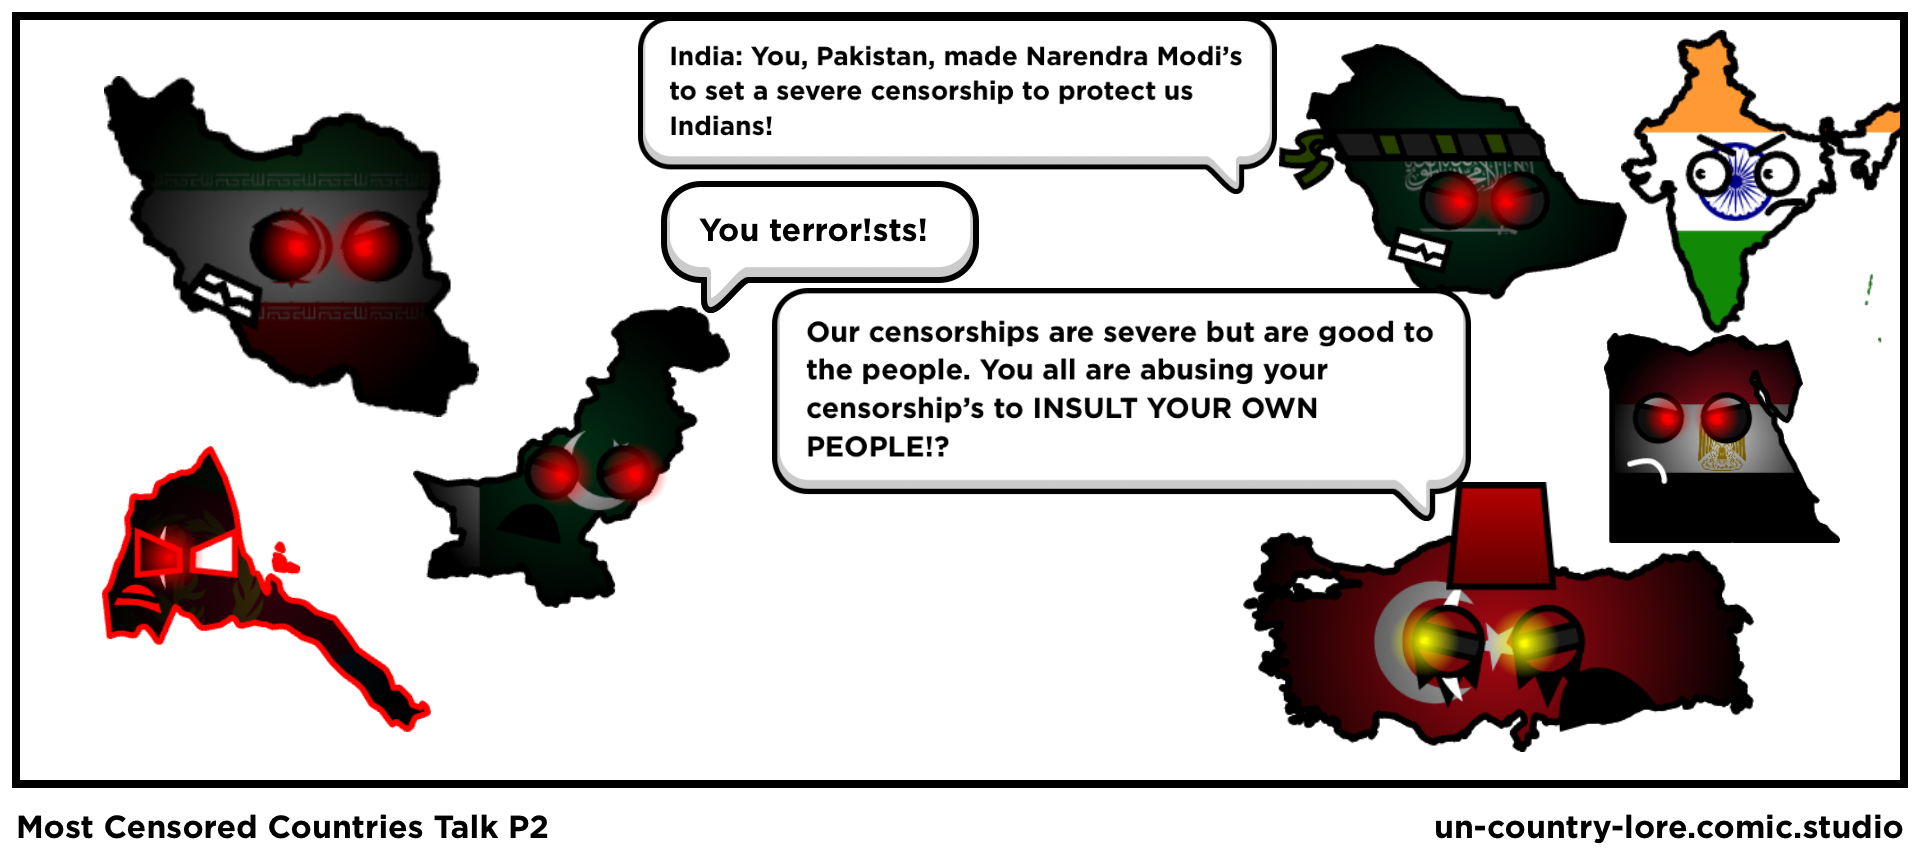 Most Censored Countries Talk P2